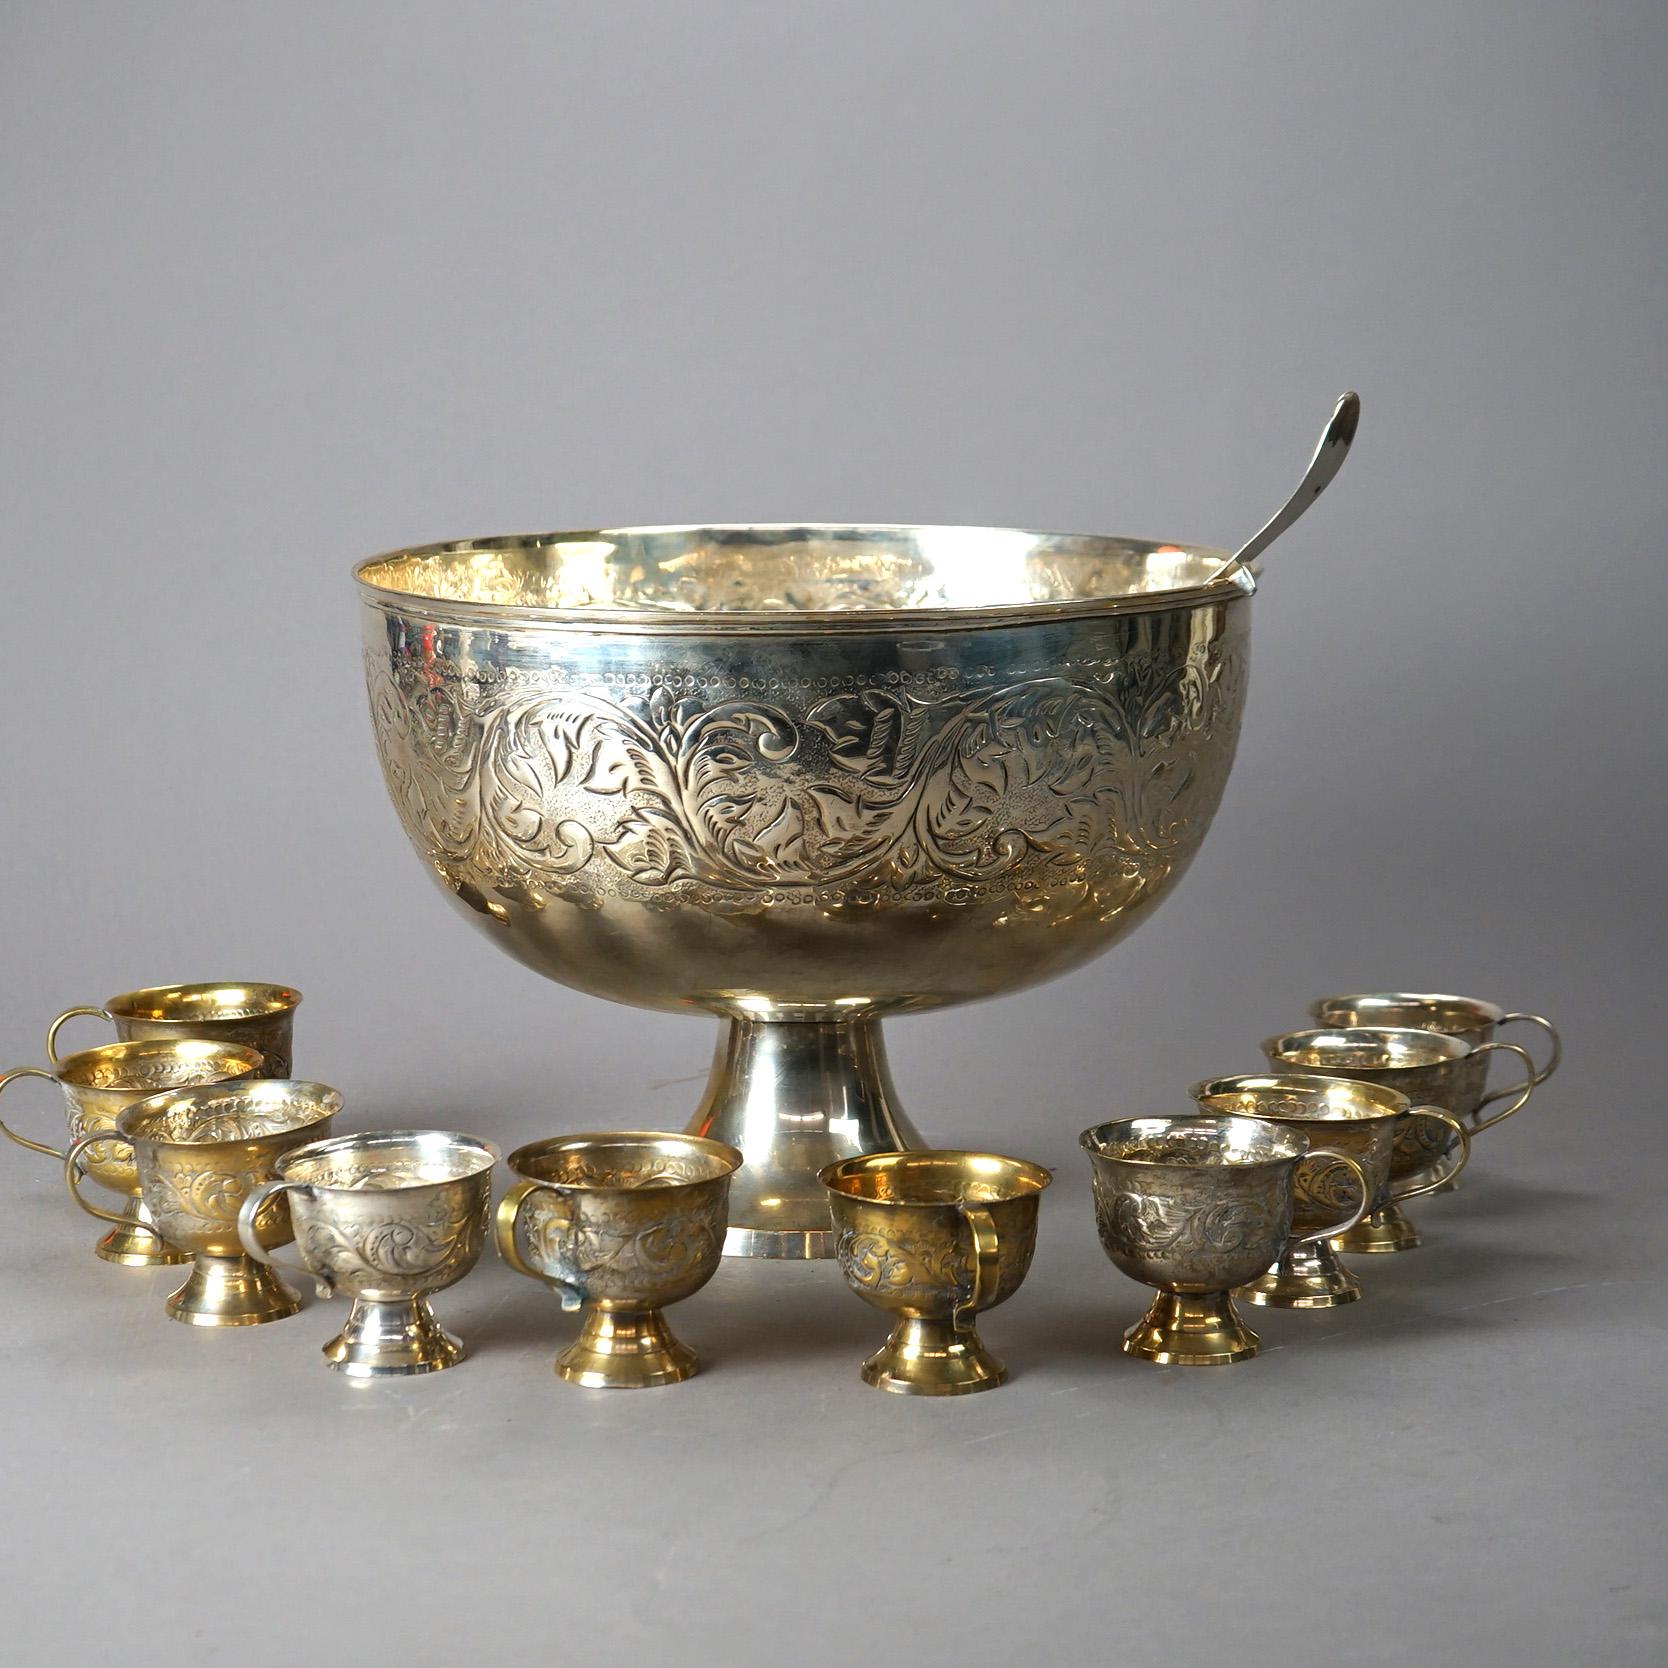 A formal punch bowl set offers silver plate construction with embossed foliate decoration, raised on flared plinth; set includes bowl, ten cups and ladle; 20th century.

Measures - Bowl 10.5